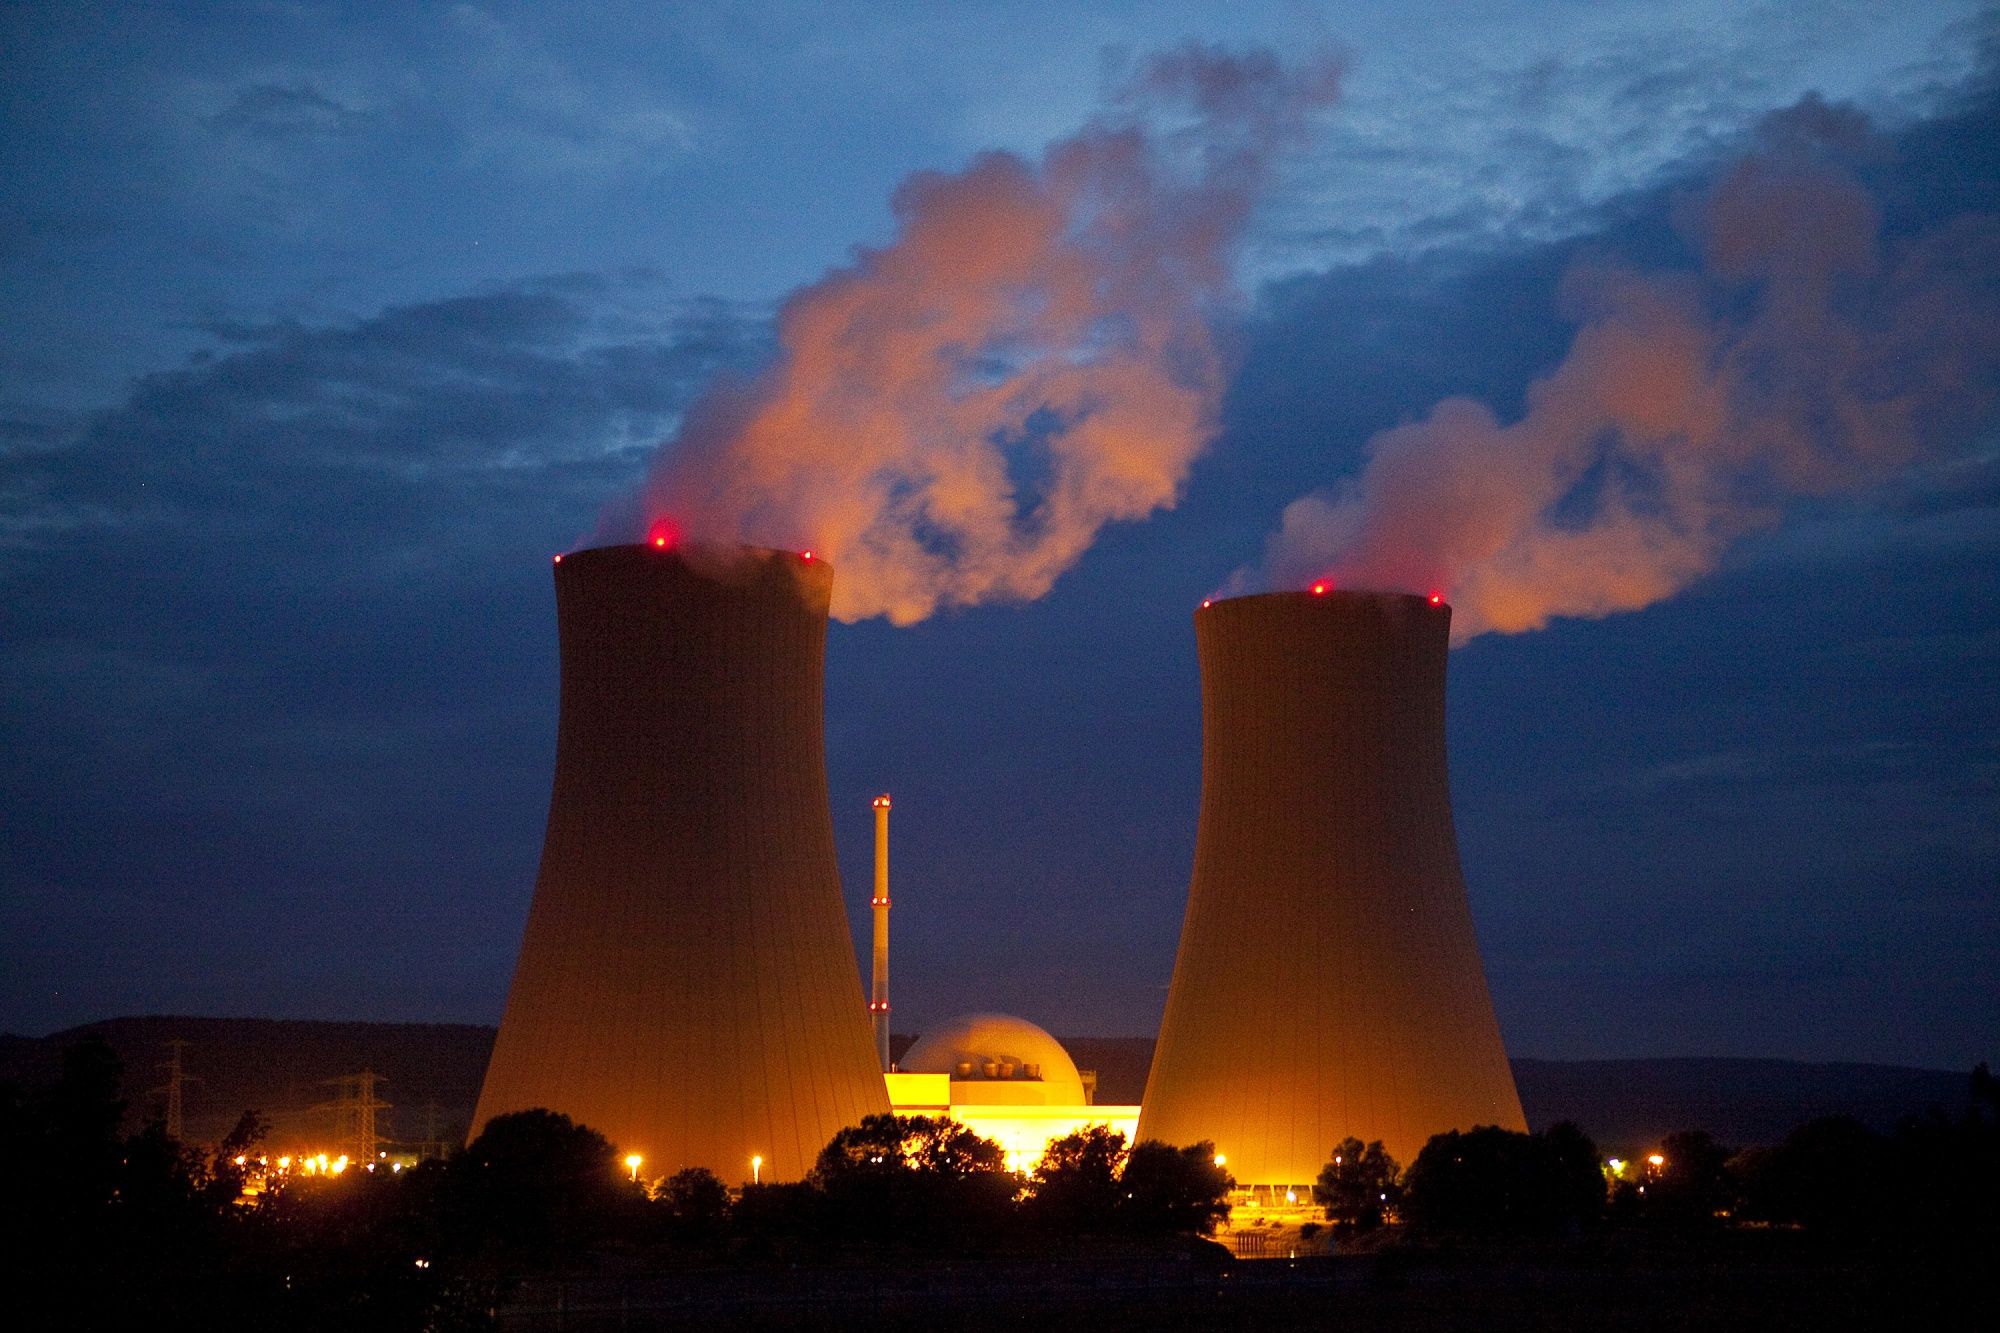 Germany permanently switches off its last 3 nuclear reactors